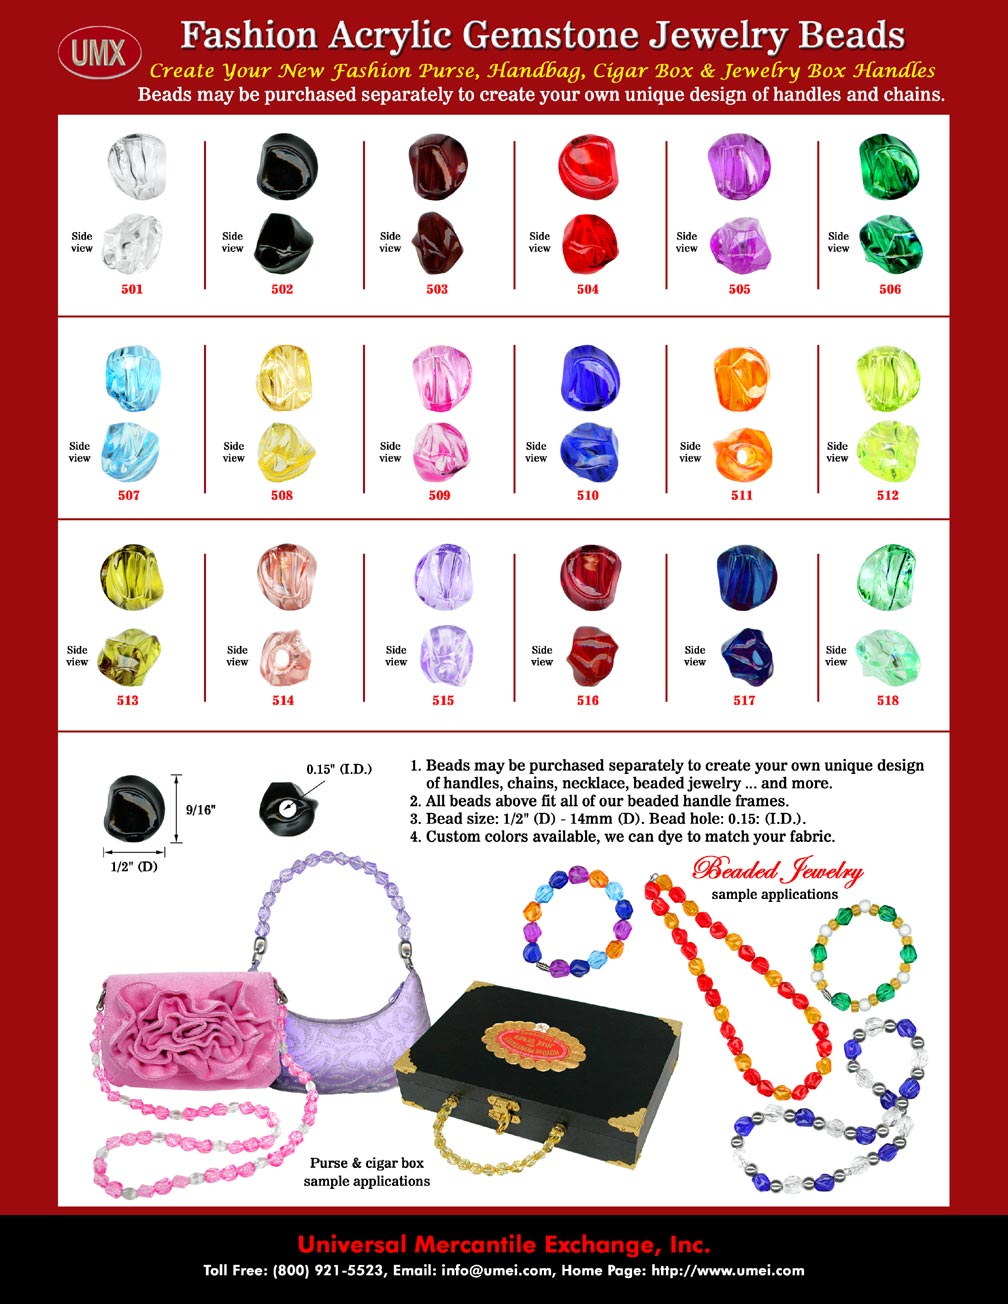 Bead Colors: The Available Color of Beads.